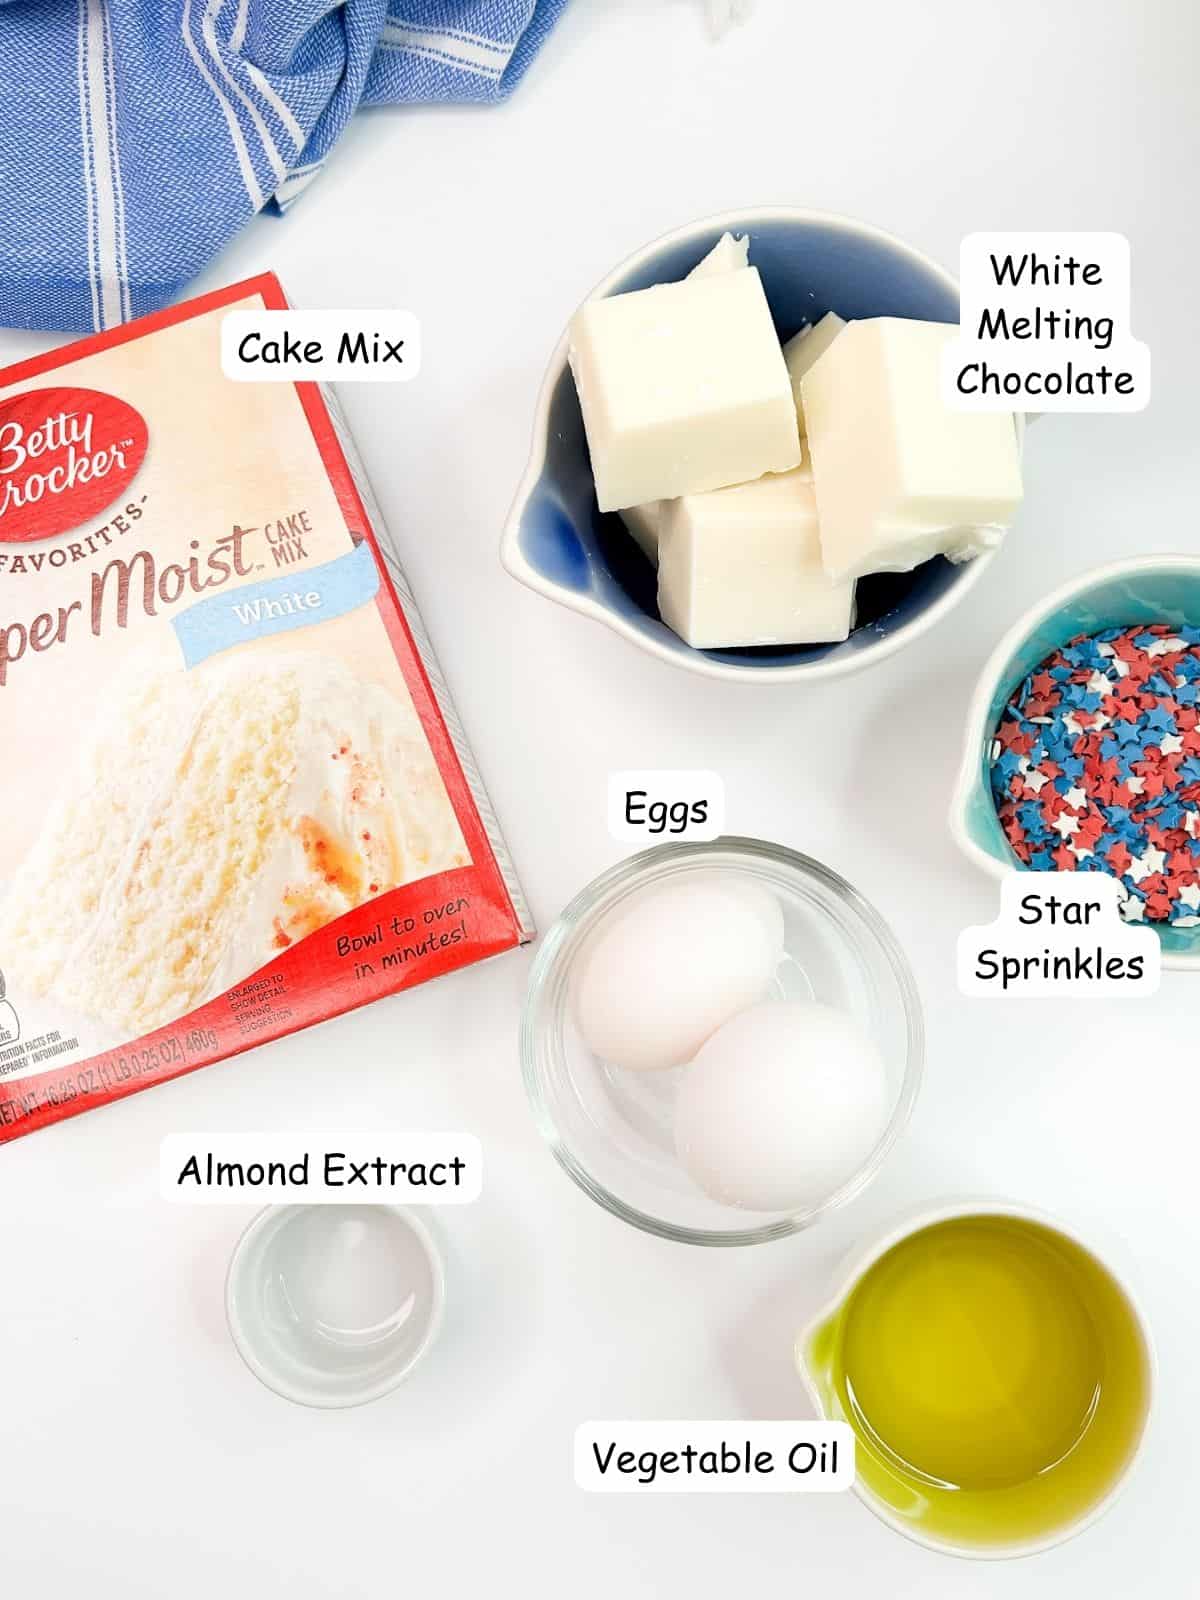 Patriotic Cake Mix cookies ingredients, cake mix, vegetable oil, eggs, sprinkles, almond extract and white chocolate.